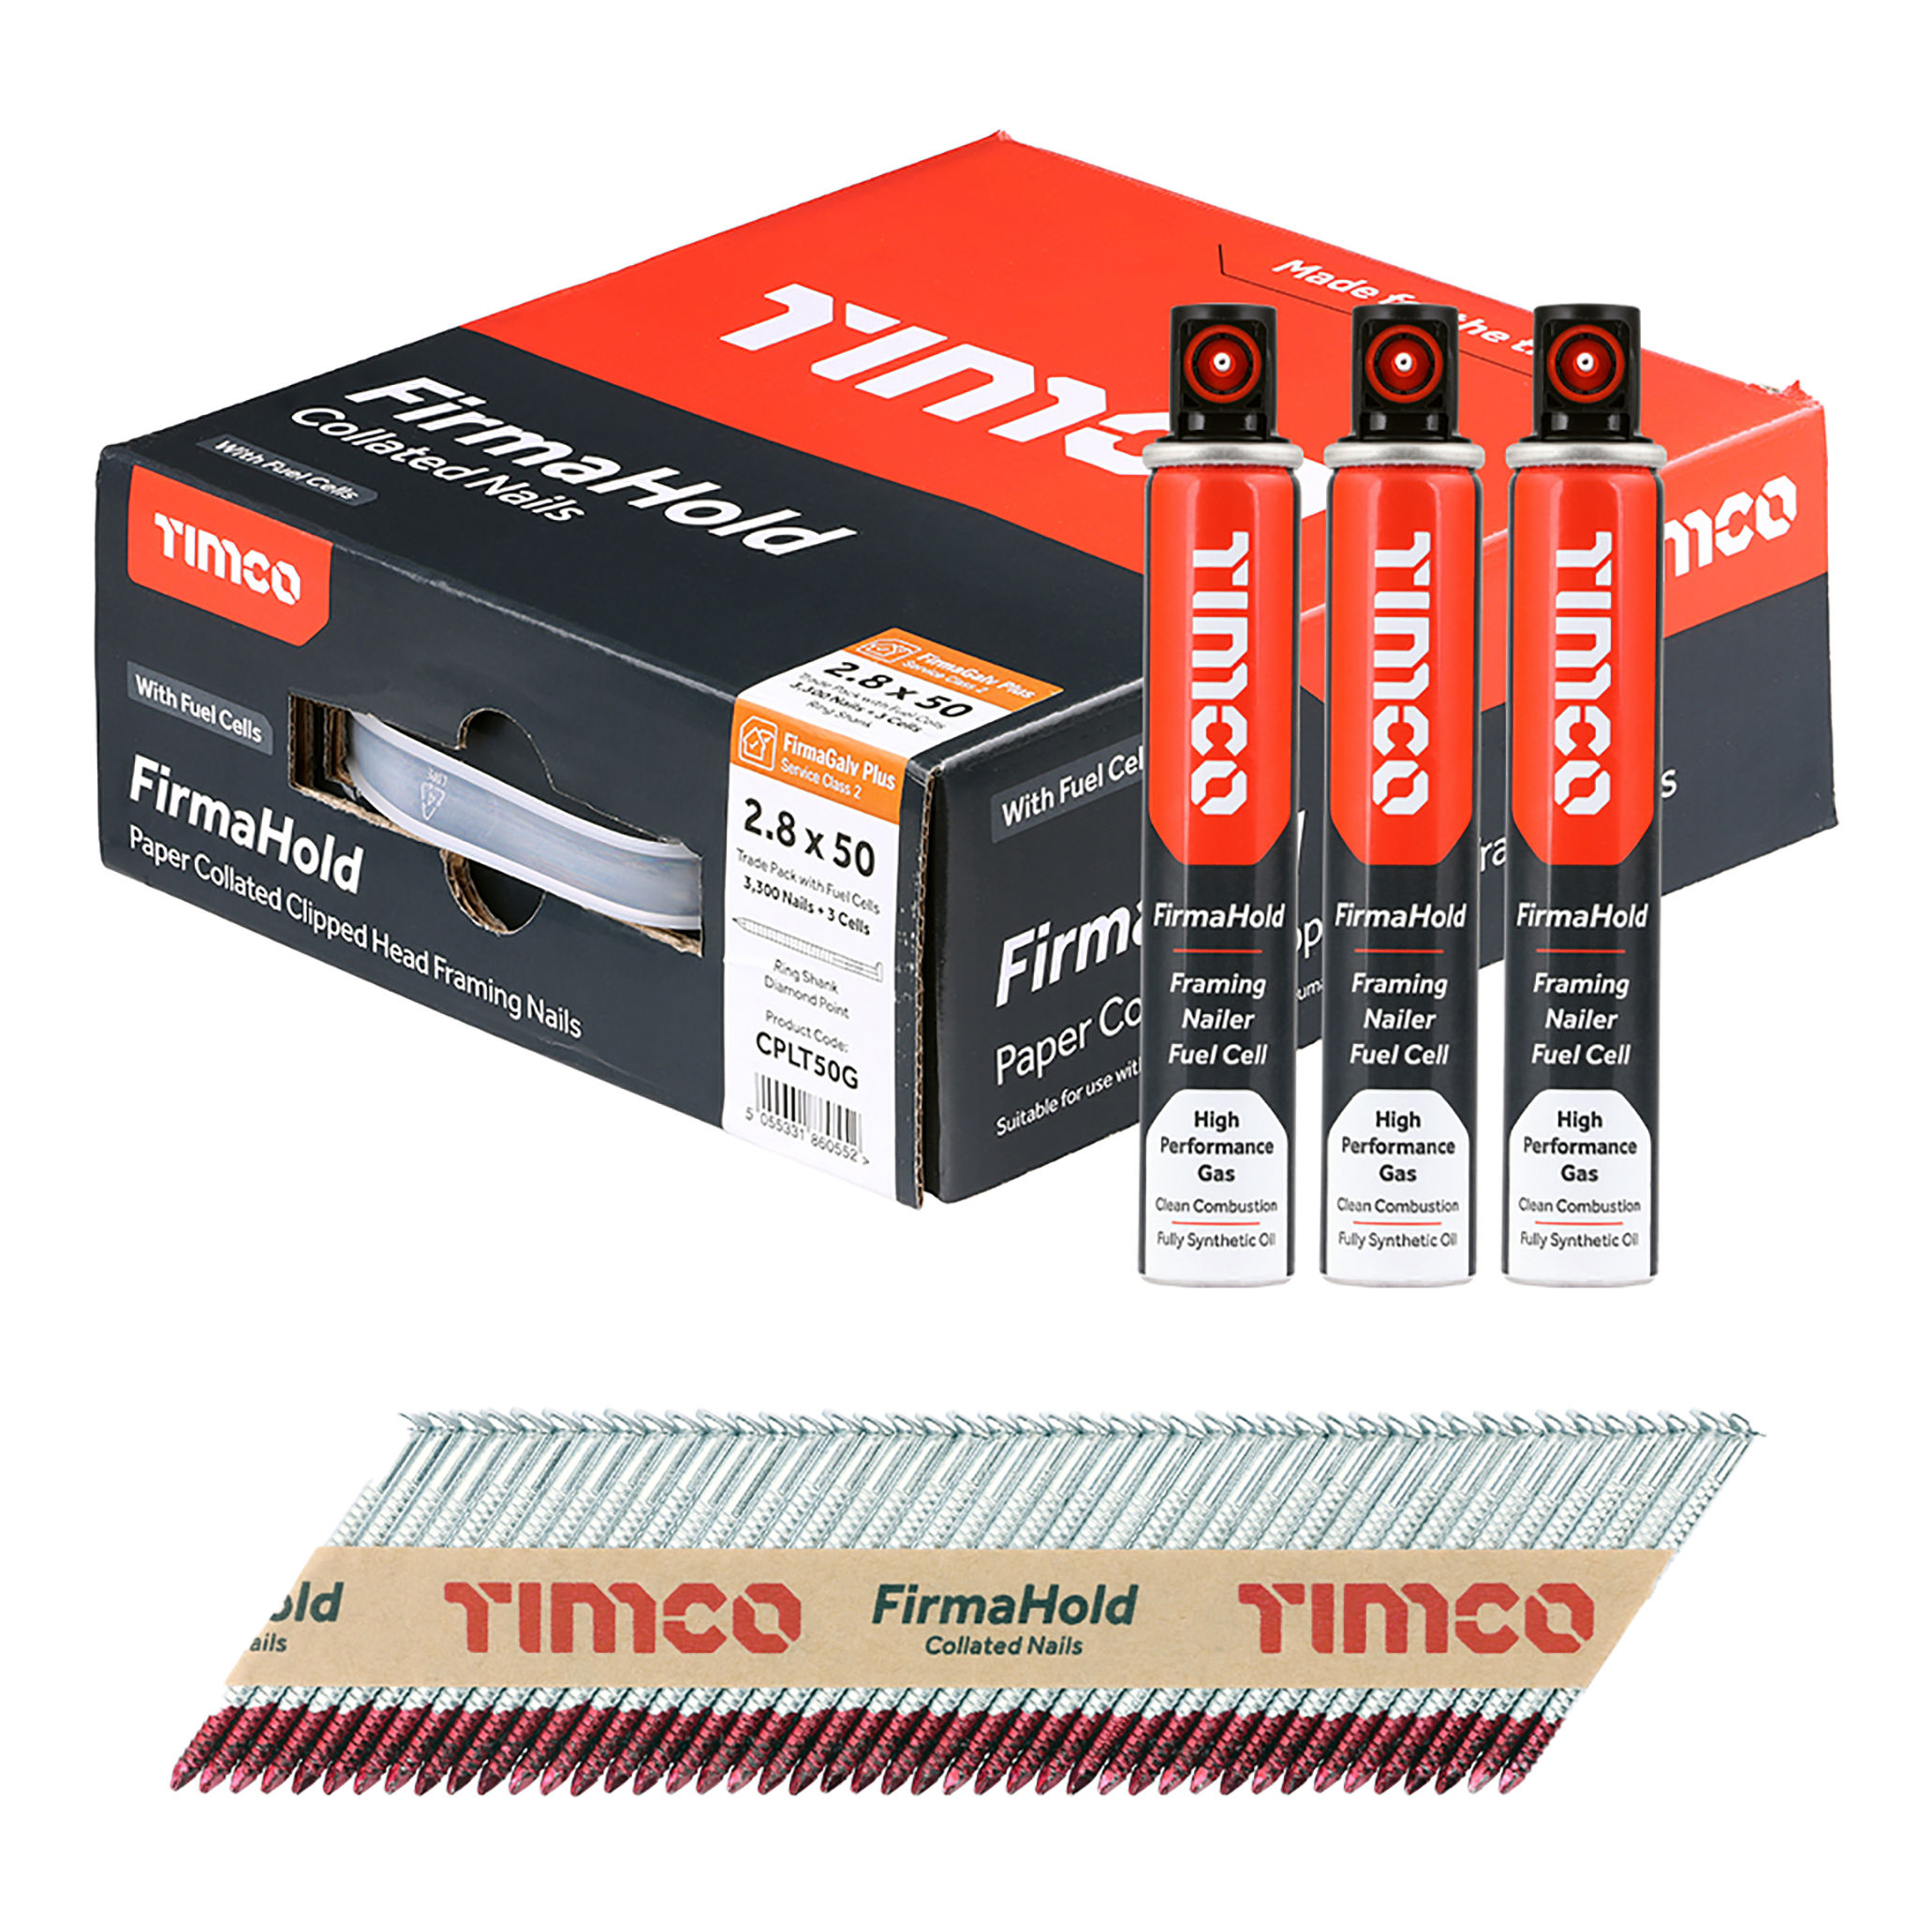 Timco FirmaHold Collated Clipped Head Ring Shank Nails and 3 Fuel Cells (Box of 3300) 2.8mm x 50mm - CPLT50G